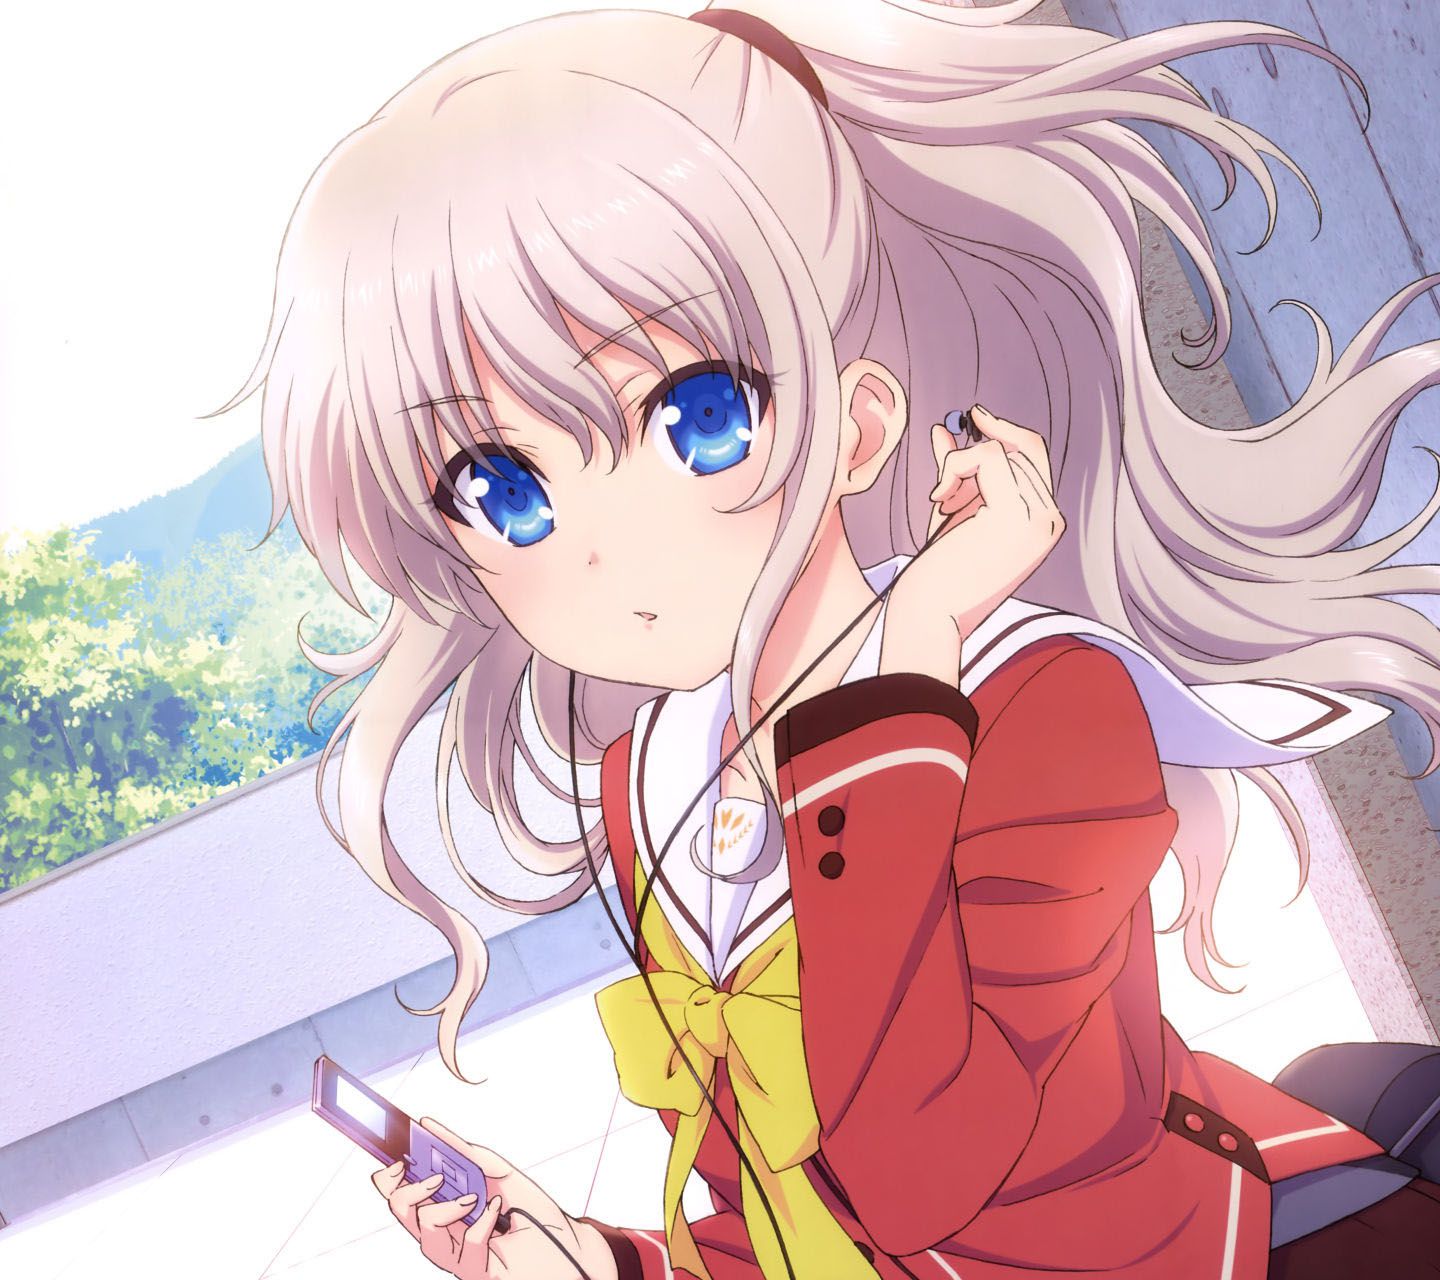 Charlotte シャーロット Android壁紙 7 友利奈緒 アニメ壁紙ネット Pc Android Iphone壁紙 画像